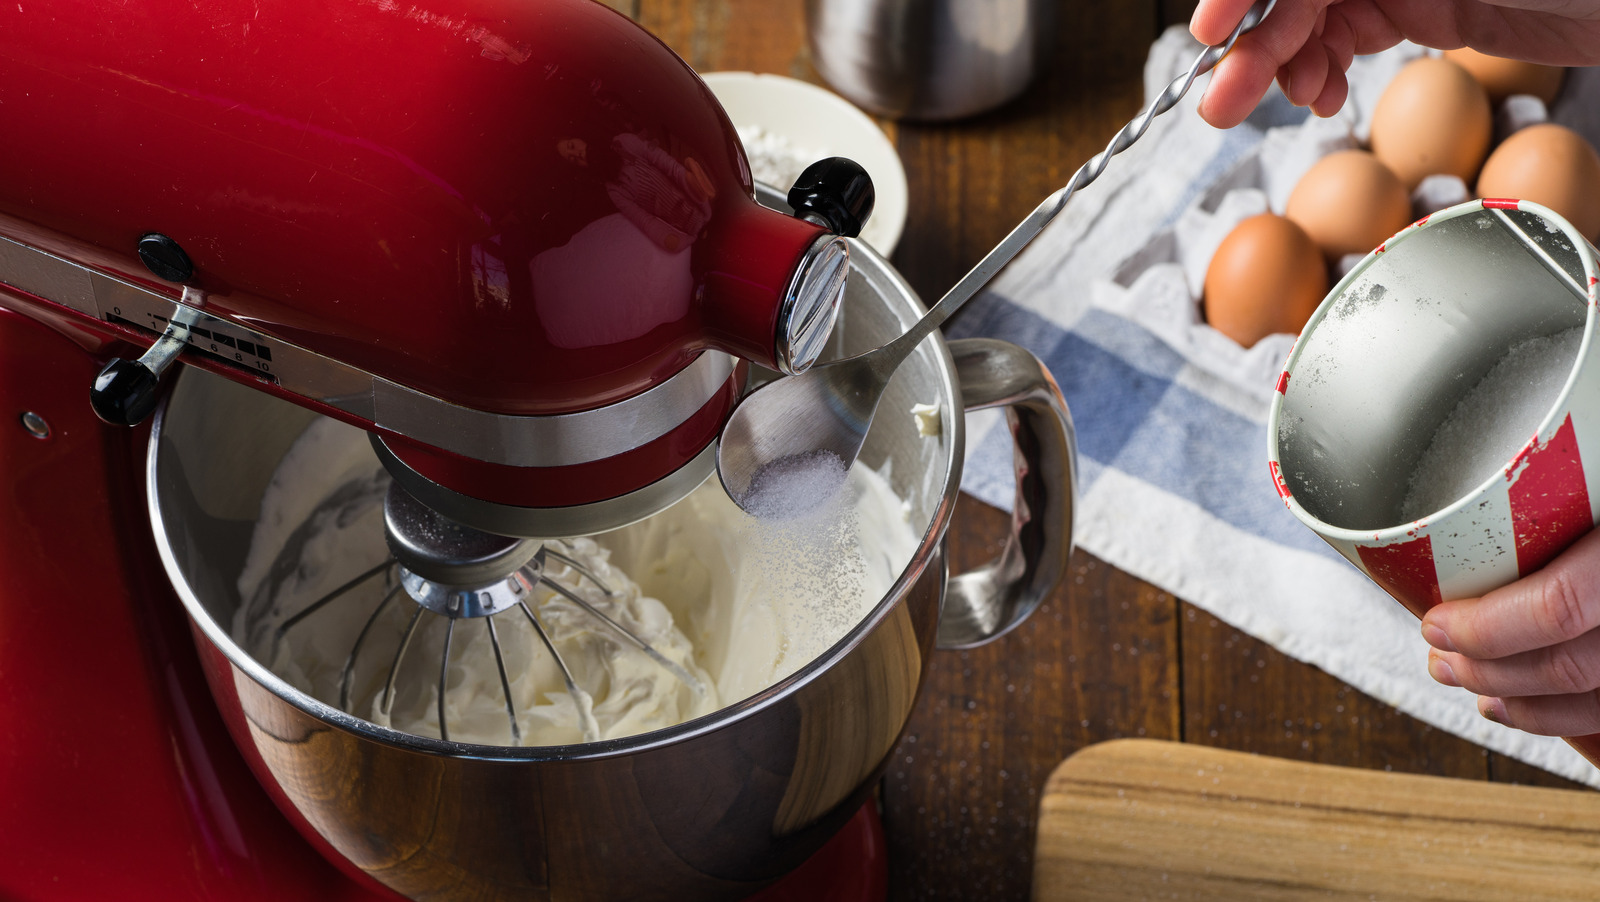 https://www.mashed.com/img/gallery/this-limited-edition-kitchenaid-mixer-has-a-bold-new-look/l-intro-1626452005.jpg